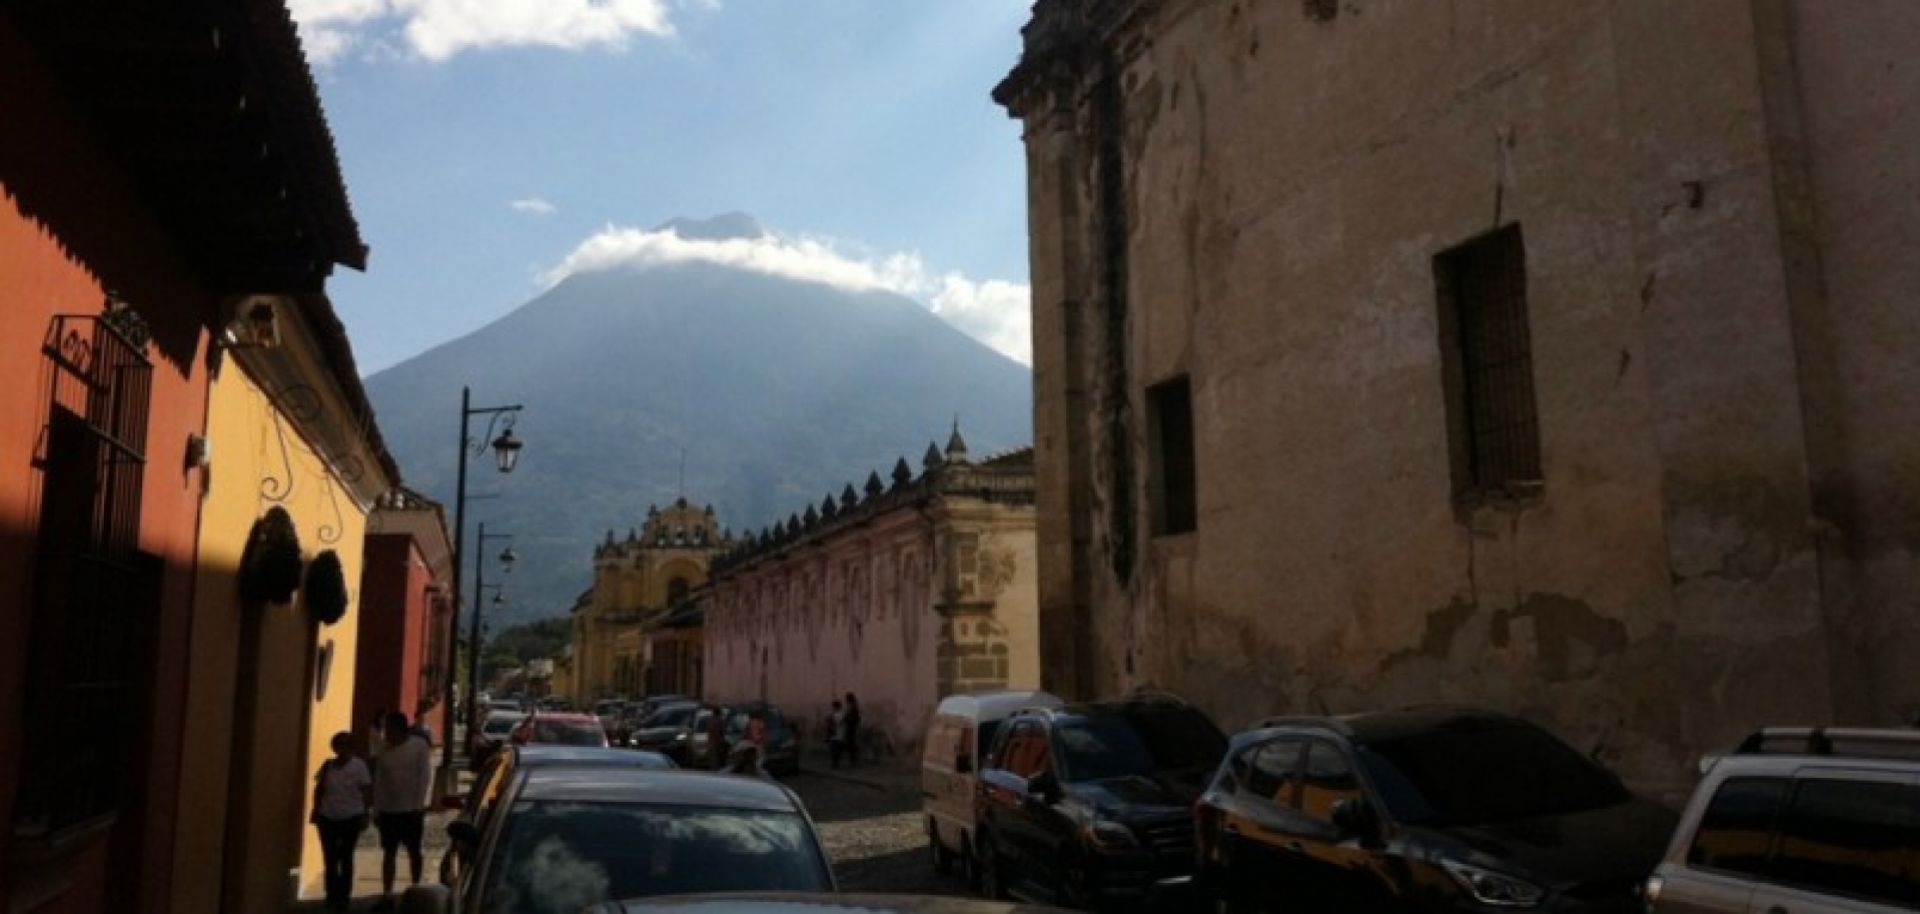 A journey to Guatemala reveals the country's stark geographic -- and cultural -- divisions.